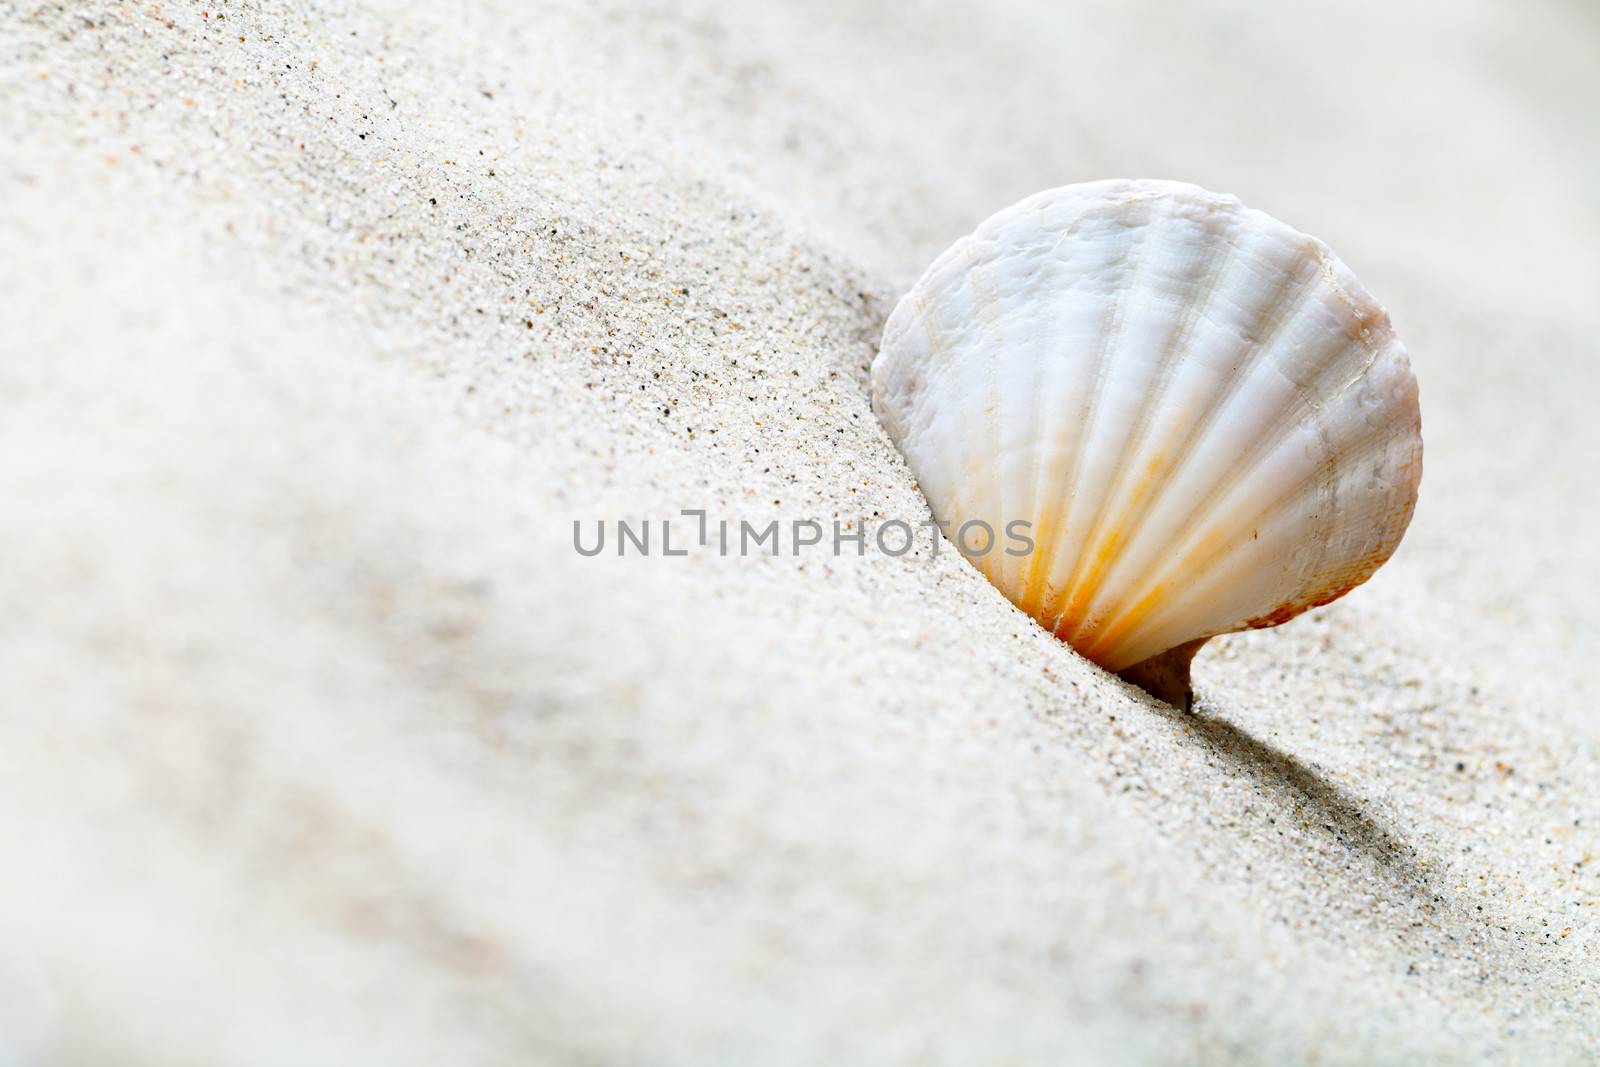 Shell on sandy beach. Summer background with copy space. Macro shot